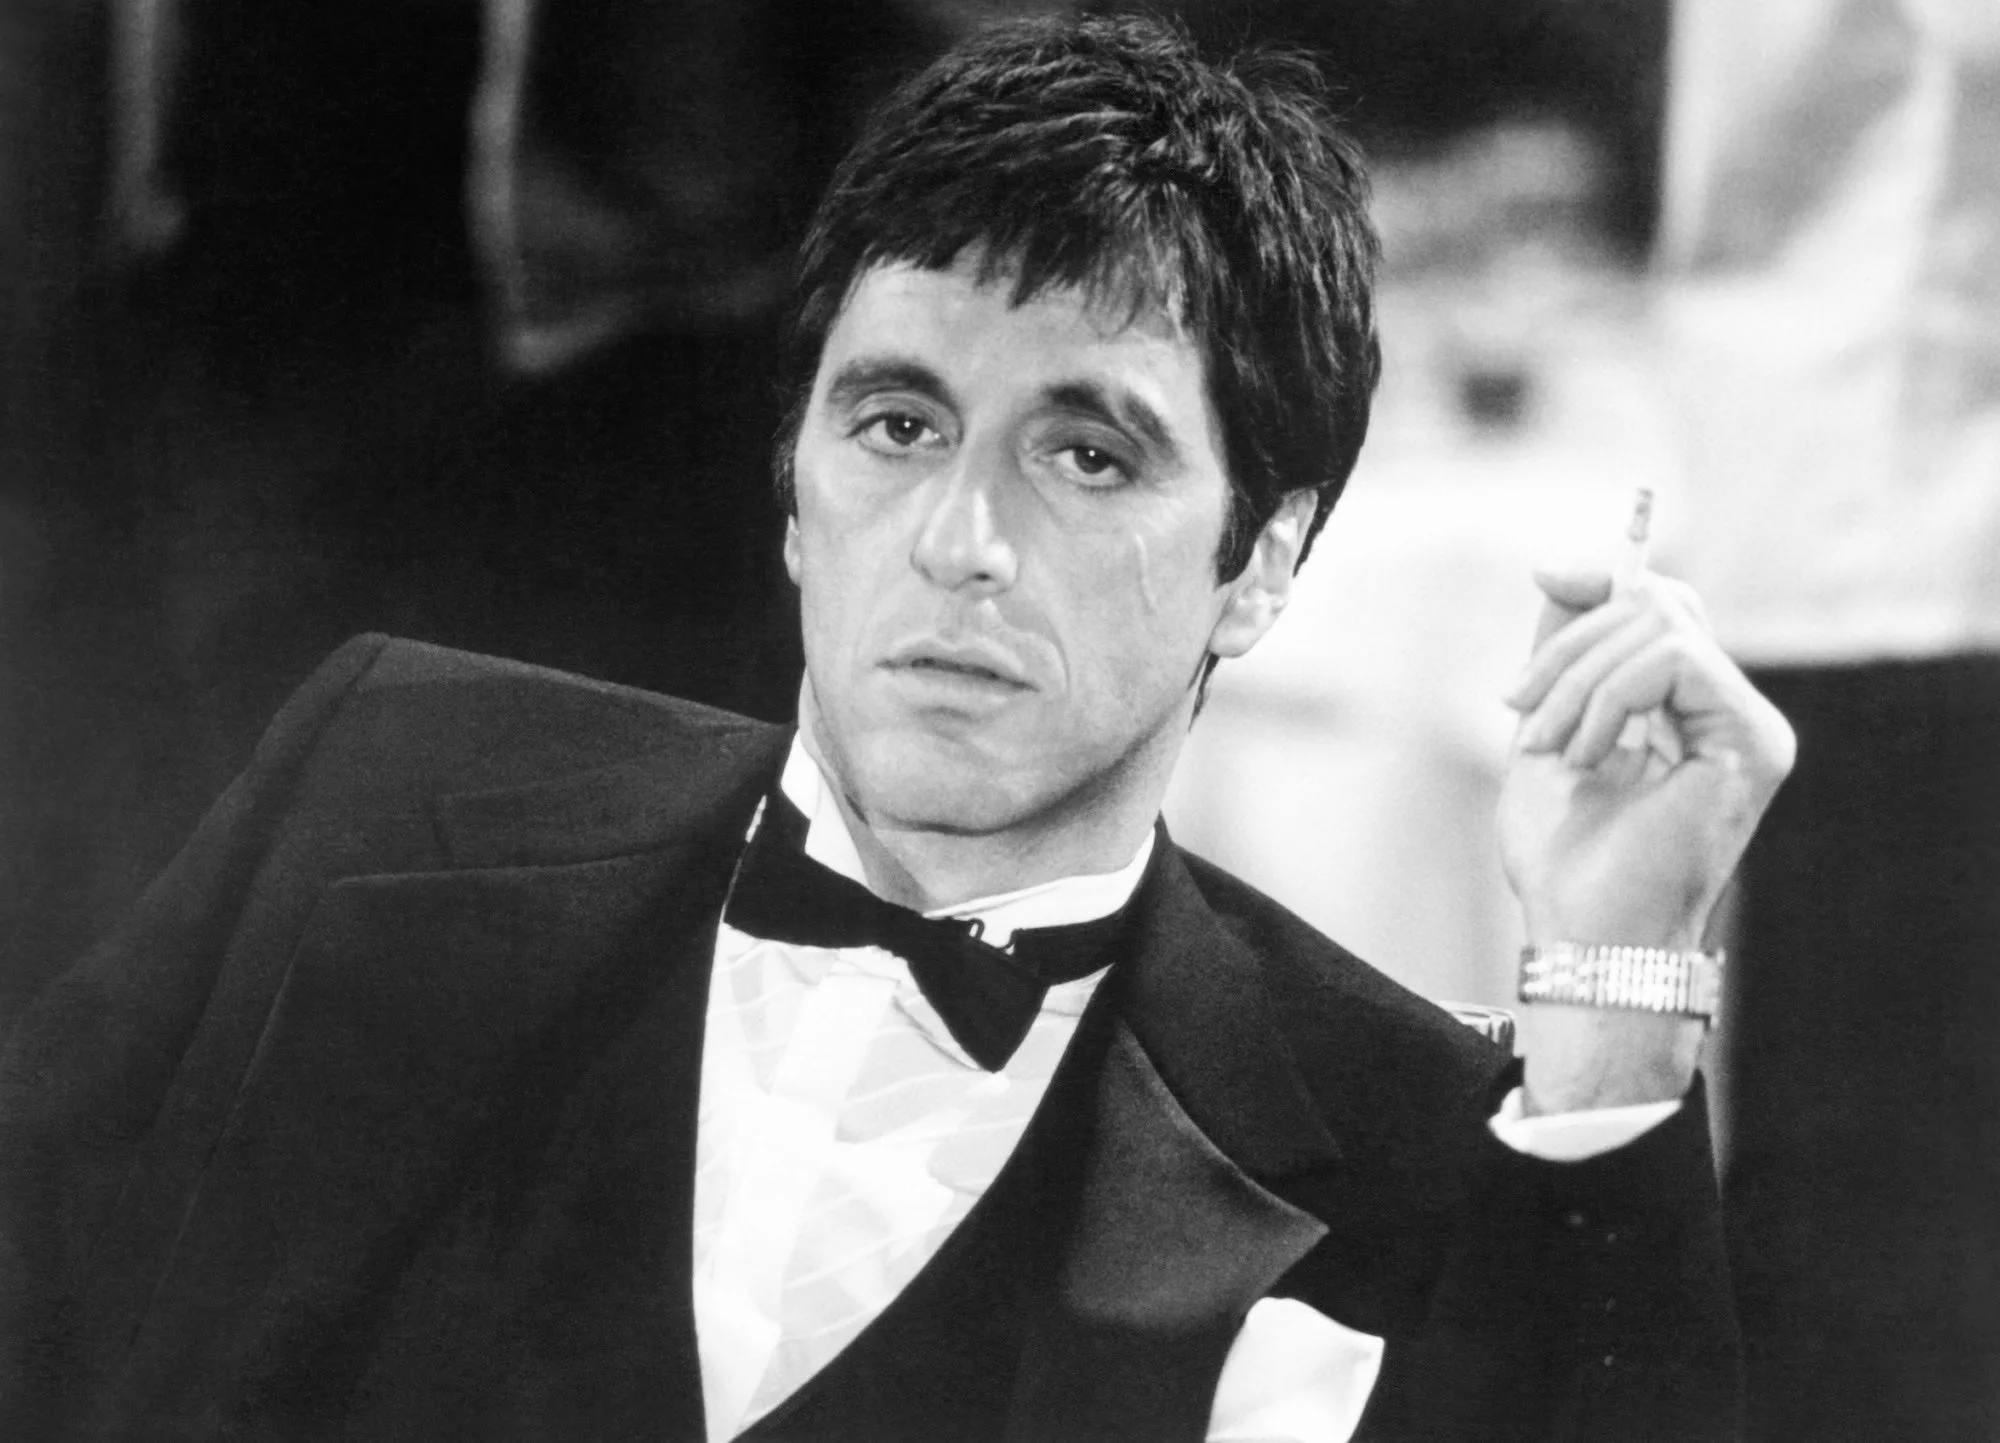 Al Pacino in Scarface 1983.